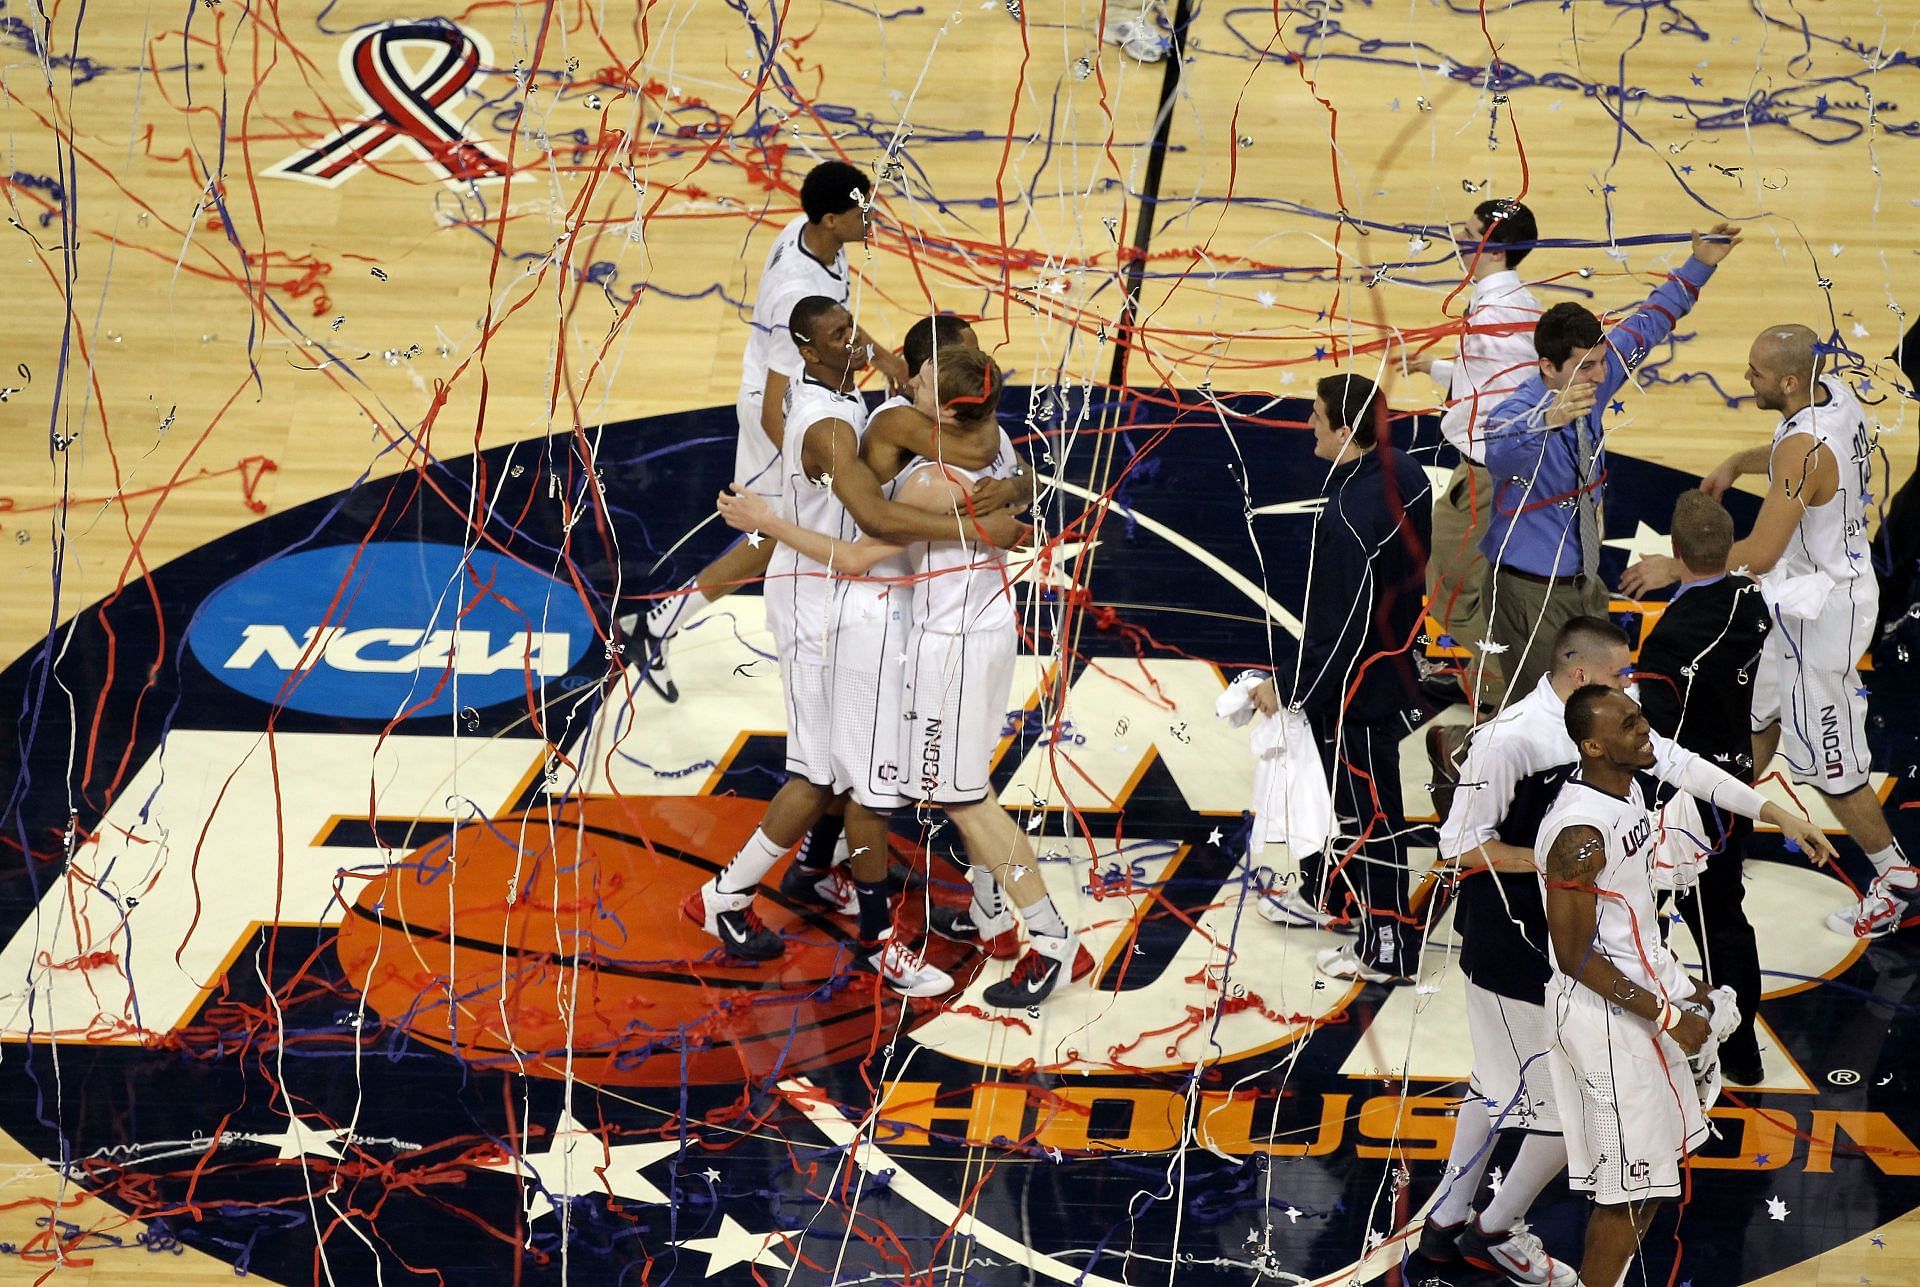 UConn celebrated its March Madness moment after winning the 2011 NCAA Tournament in one of the lowest-scoring Tournament games of the 21st century.